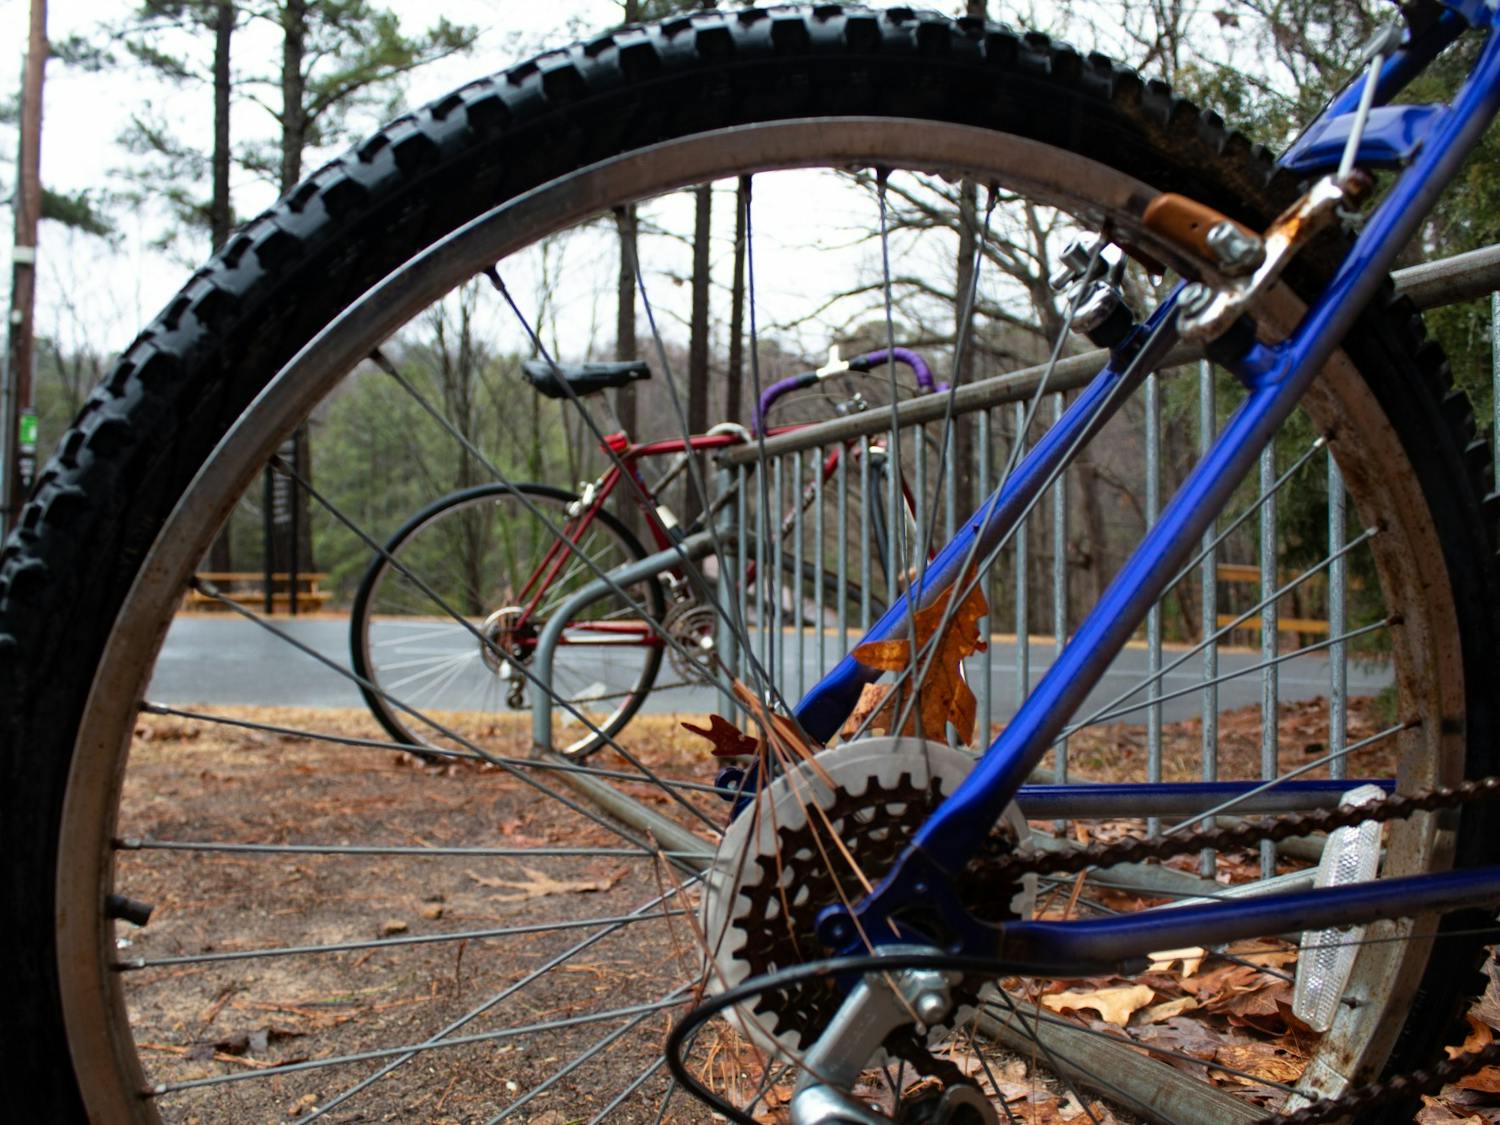 Bikes lined up at the UNC Outdoor Education Center on Feb. 7, 2022 wait for a less rainy day to be taken out.